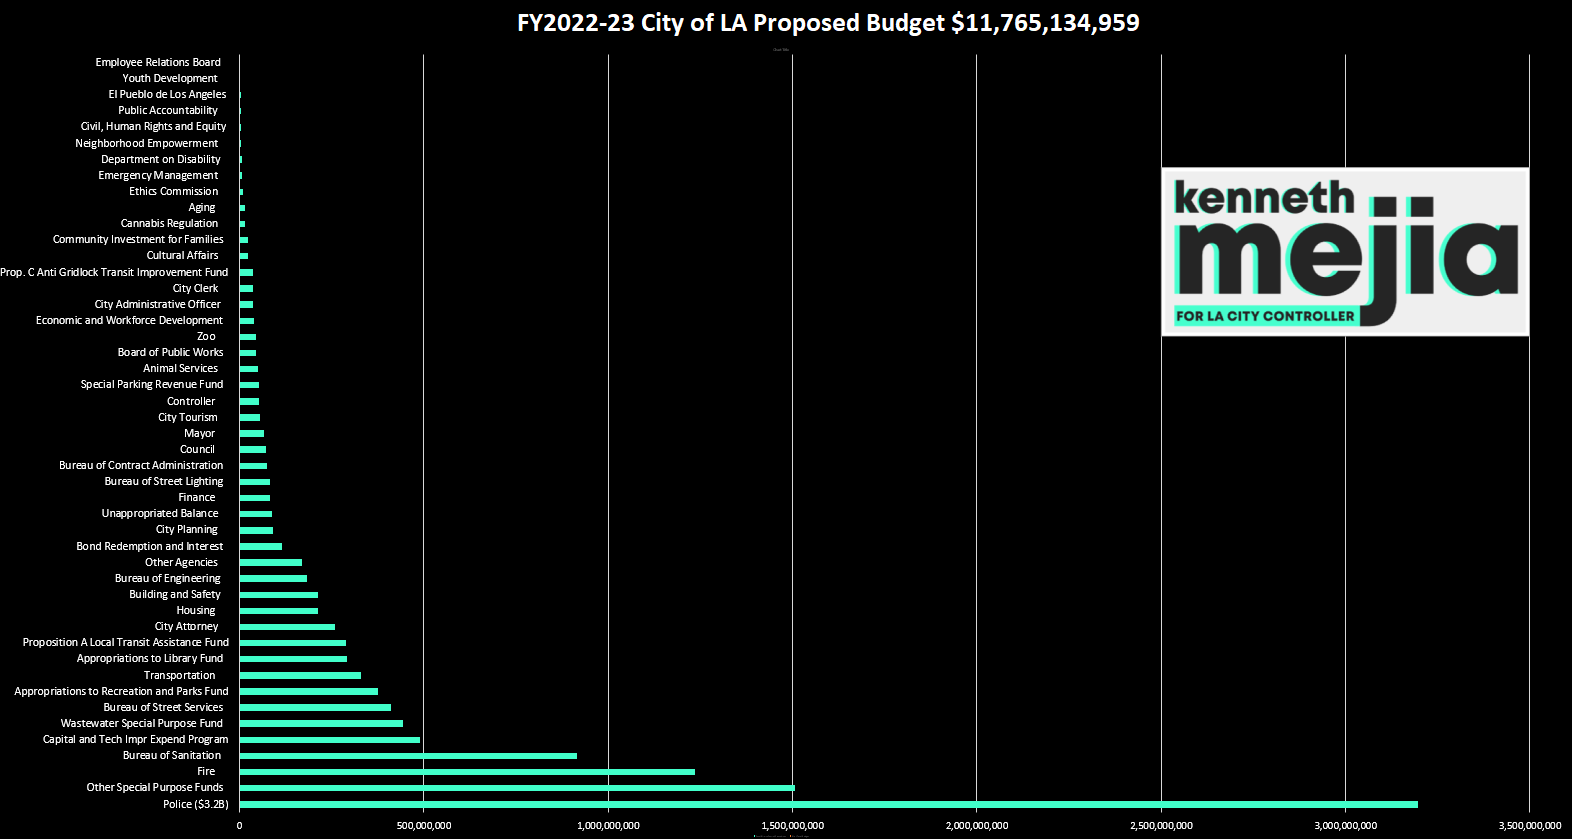 a bar graph showing the 2022-2023 proposed budget for the City of LA, with the vast, vast majority of the budget allocated to policing